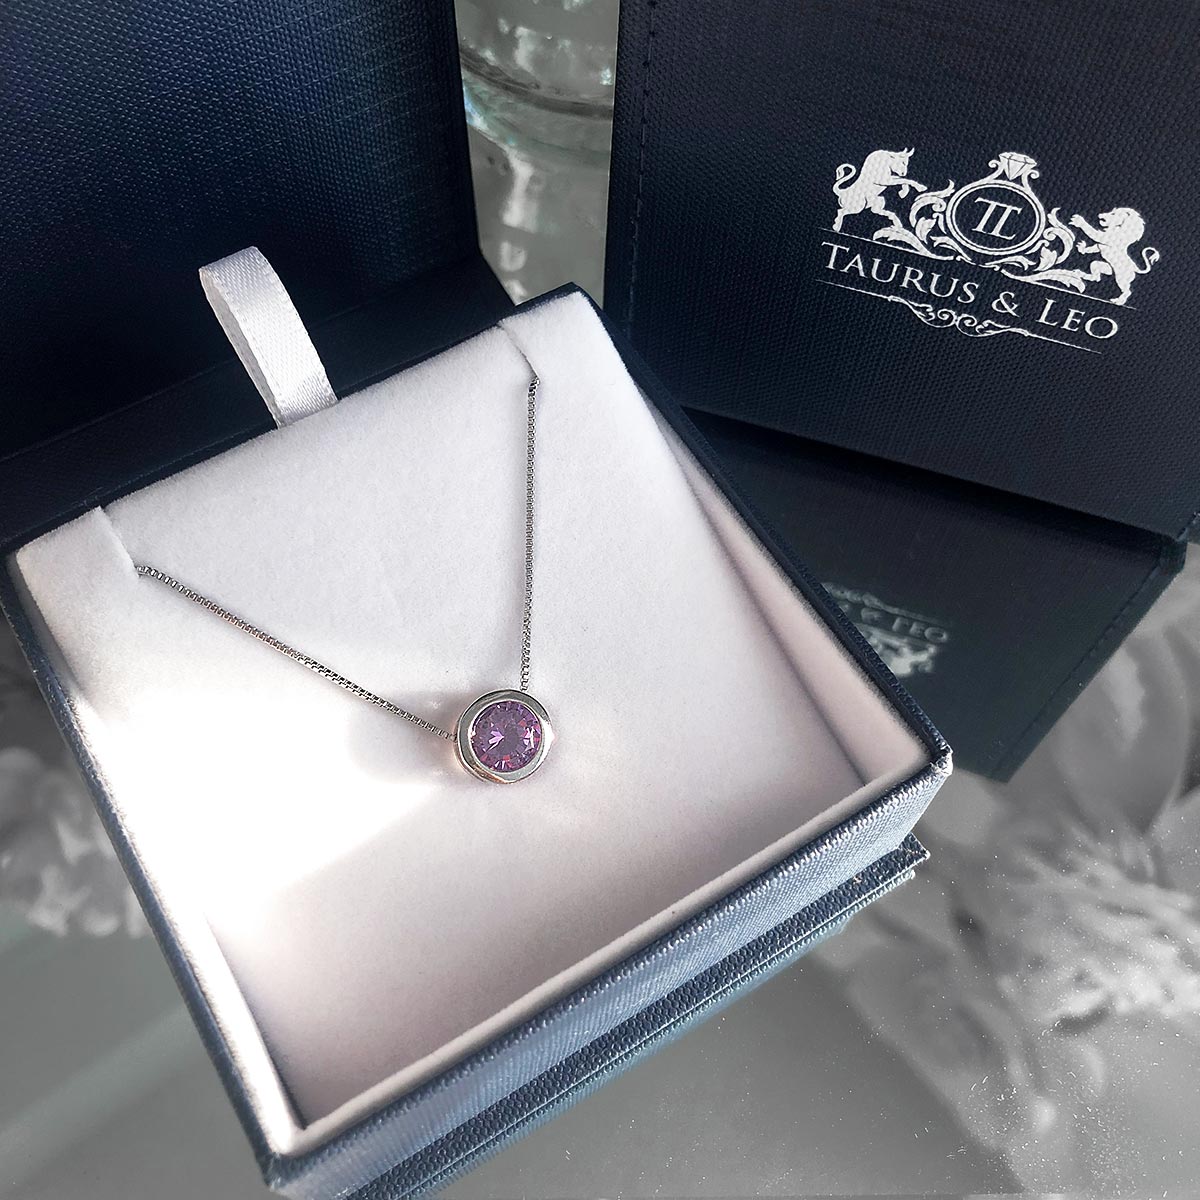 necklace, silver necklace, charm necklace, sterling silver necklace, box link chain, amethyst necklace